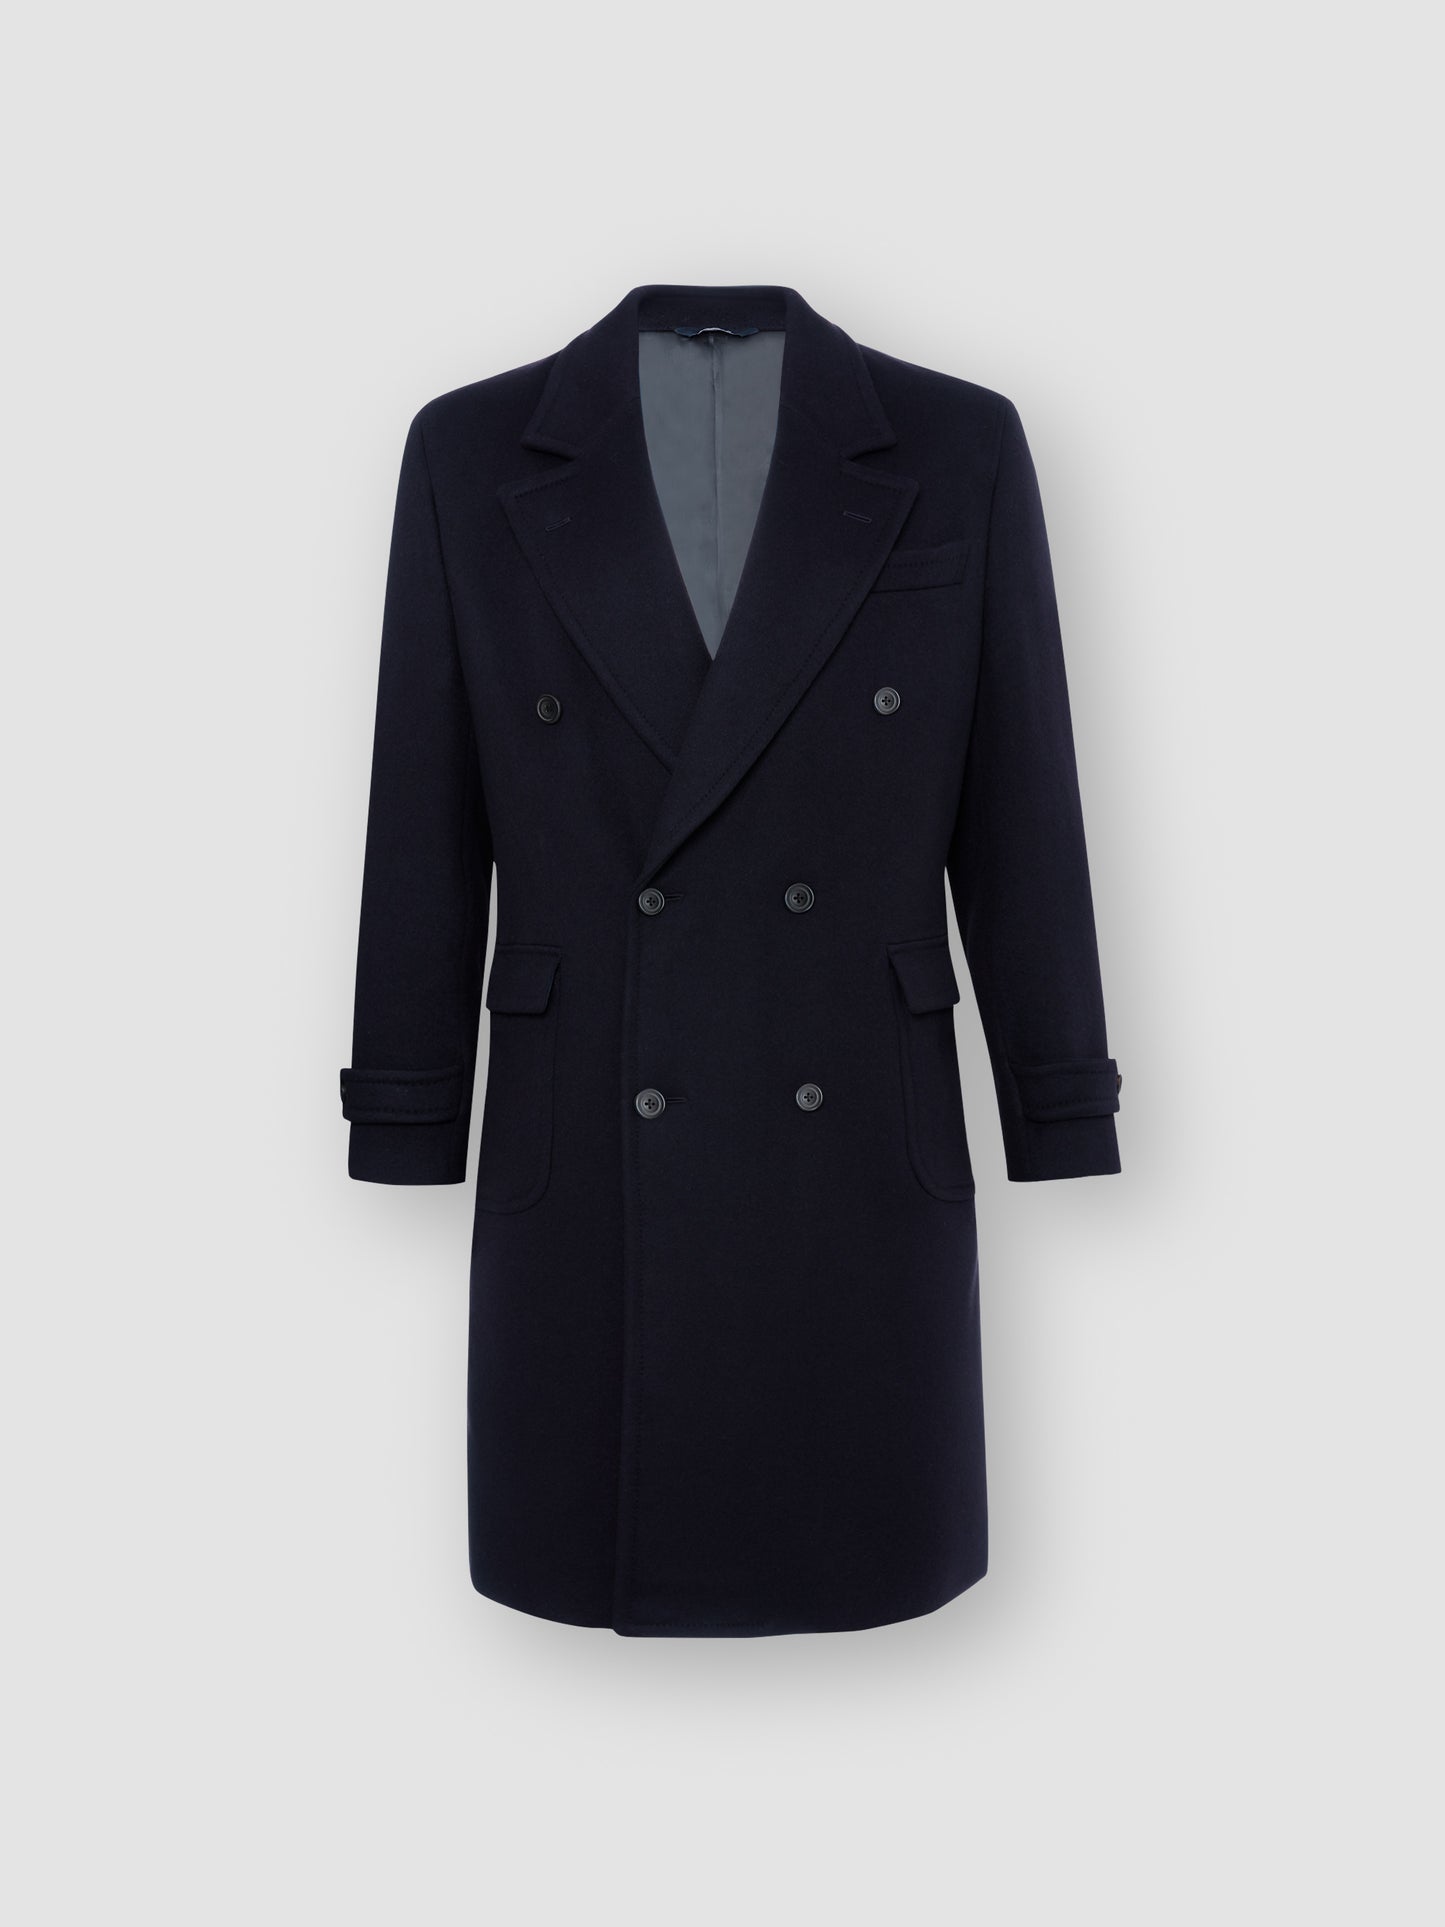 Cashmere Unstructured Double Breasted Overcoat Navy Product Image